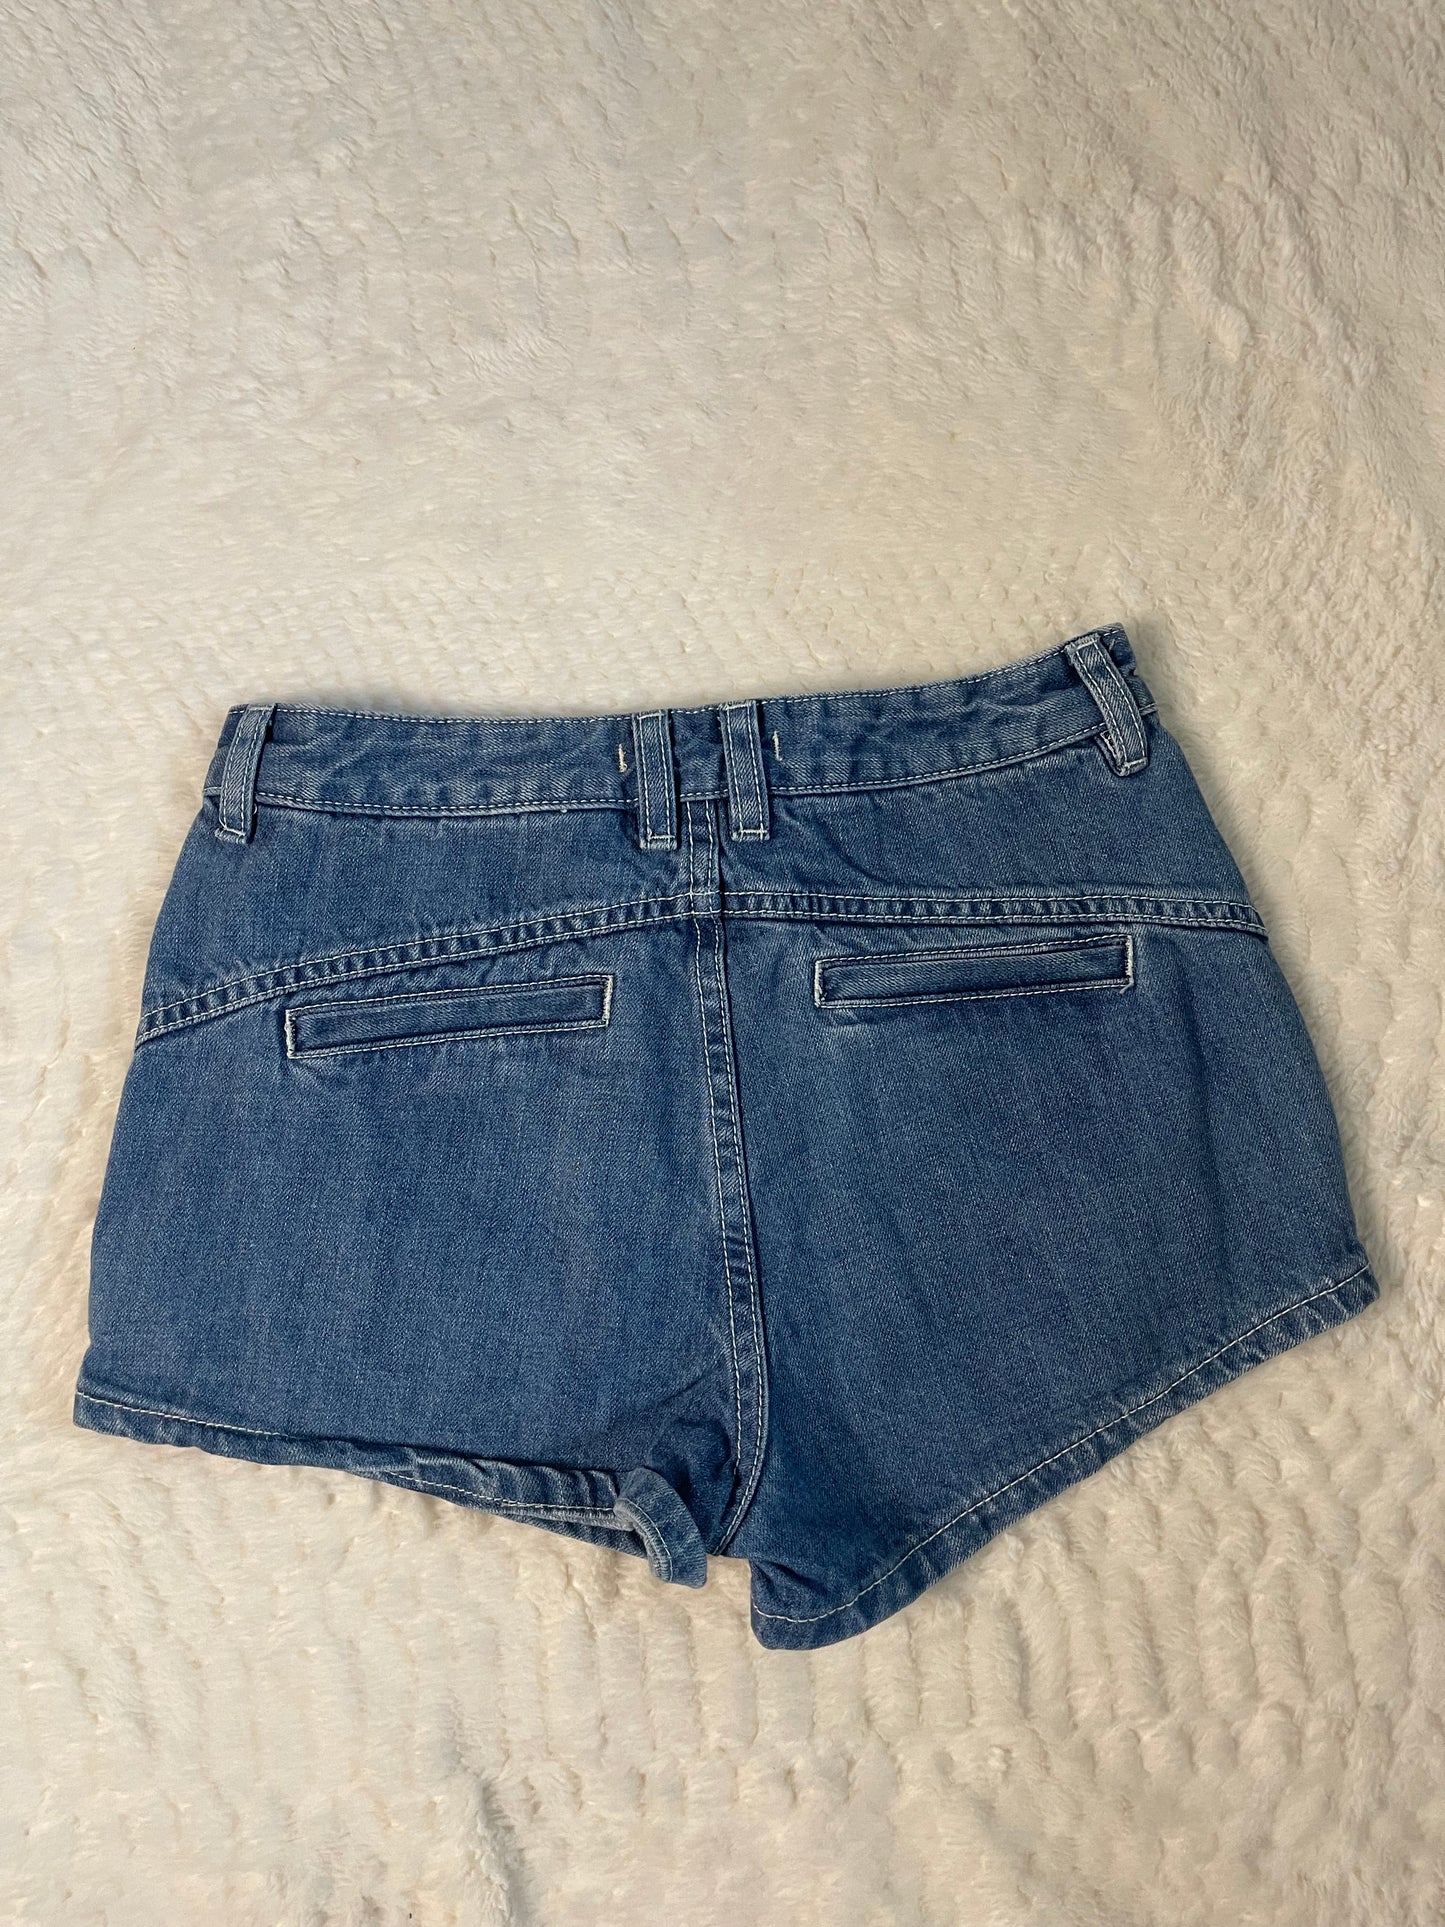 Free People high rise shorts